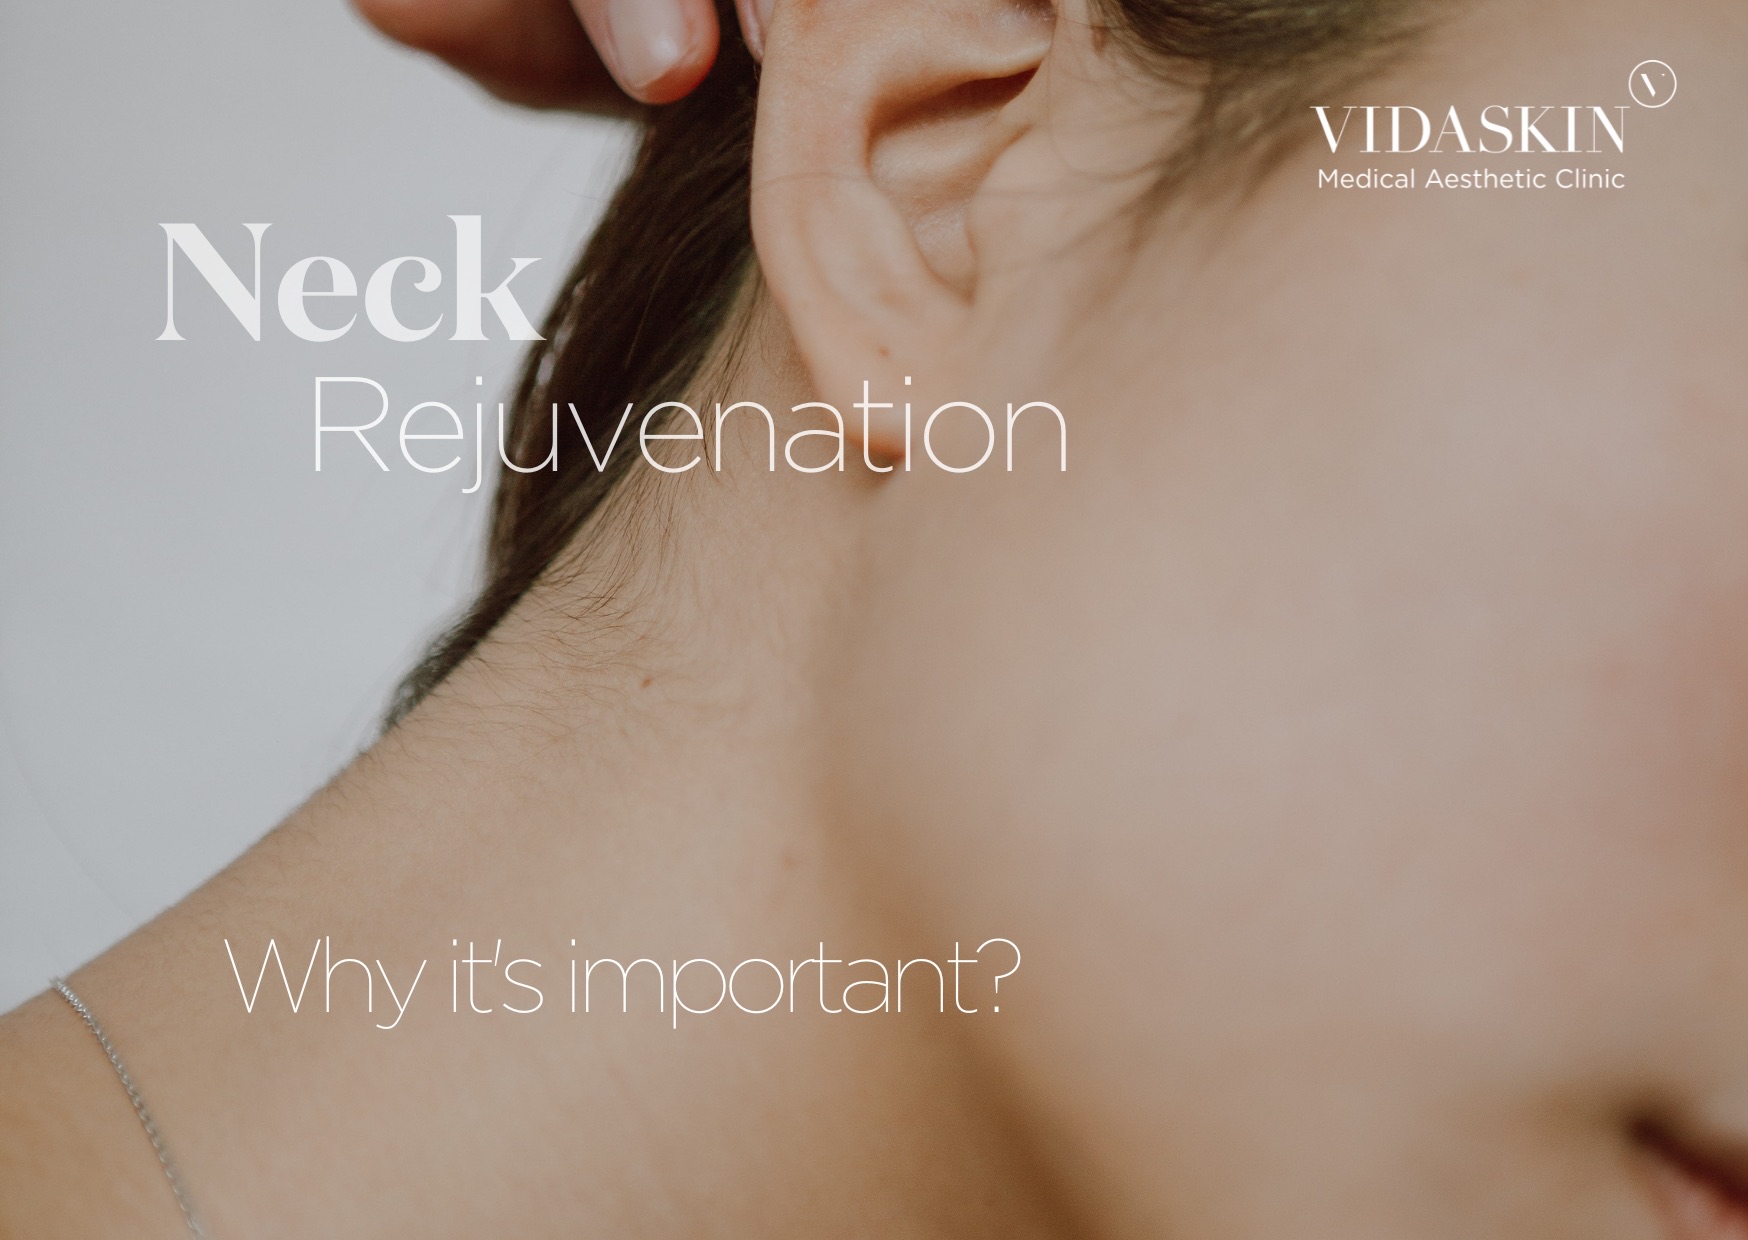 Neck Rejuvenation: Why It’s Important and Aesthetic Treatments to Consider